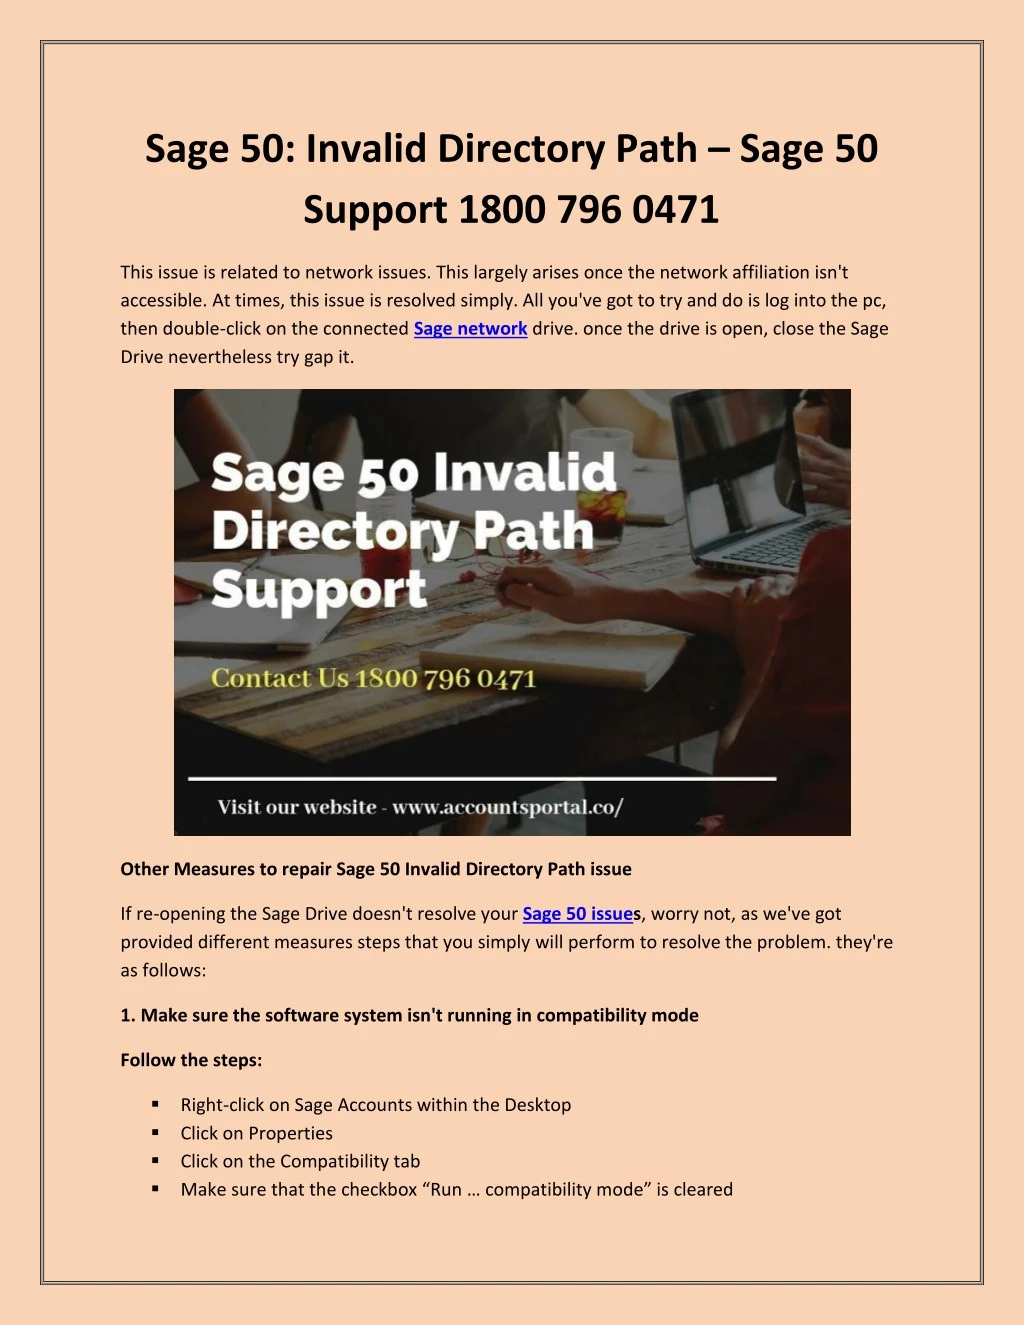 sage 50 invalid directory path sage 50 support